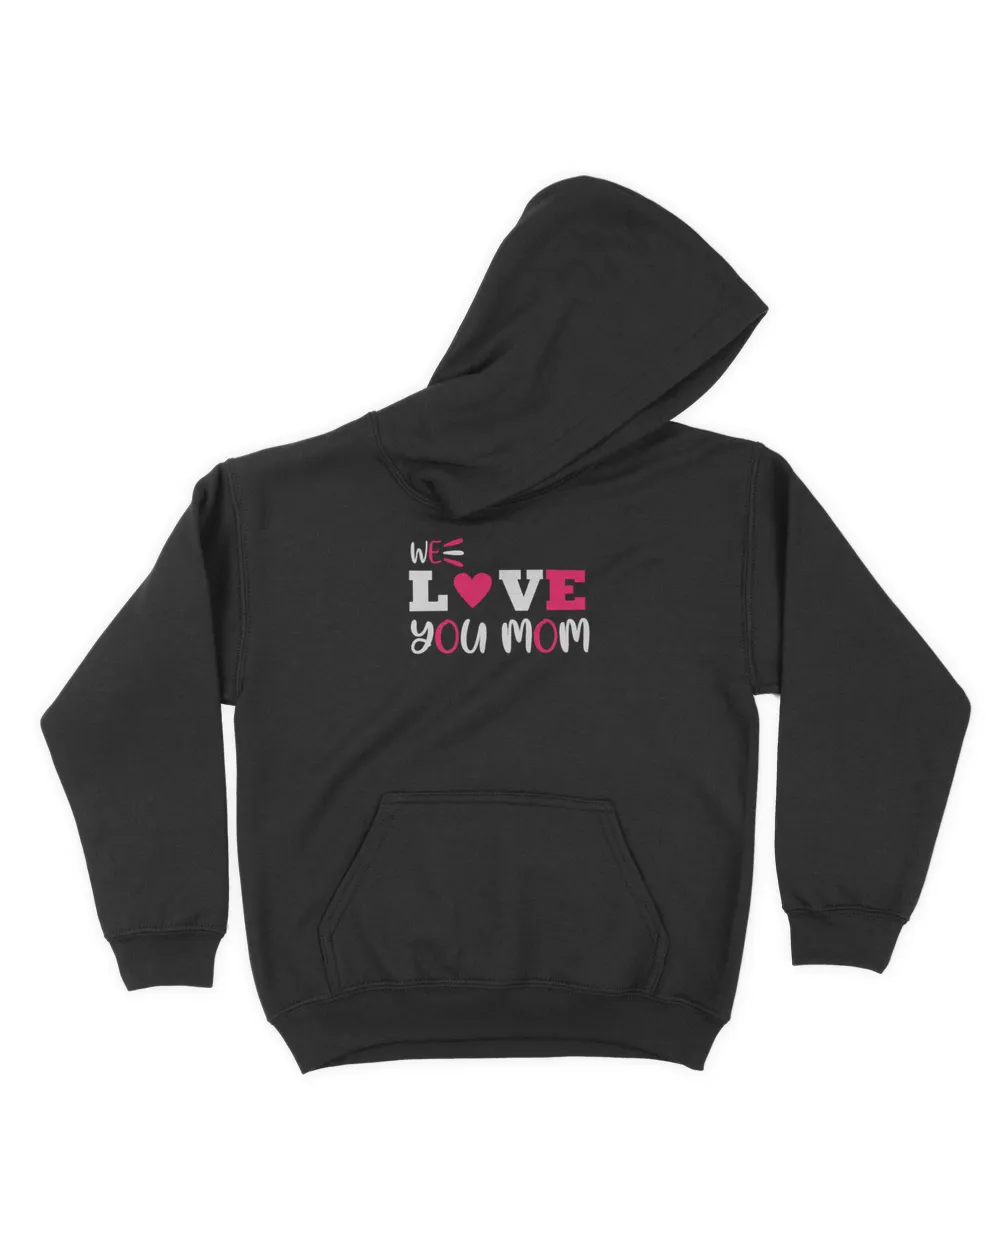 We love you mom t shirt